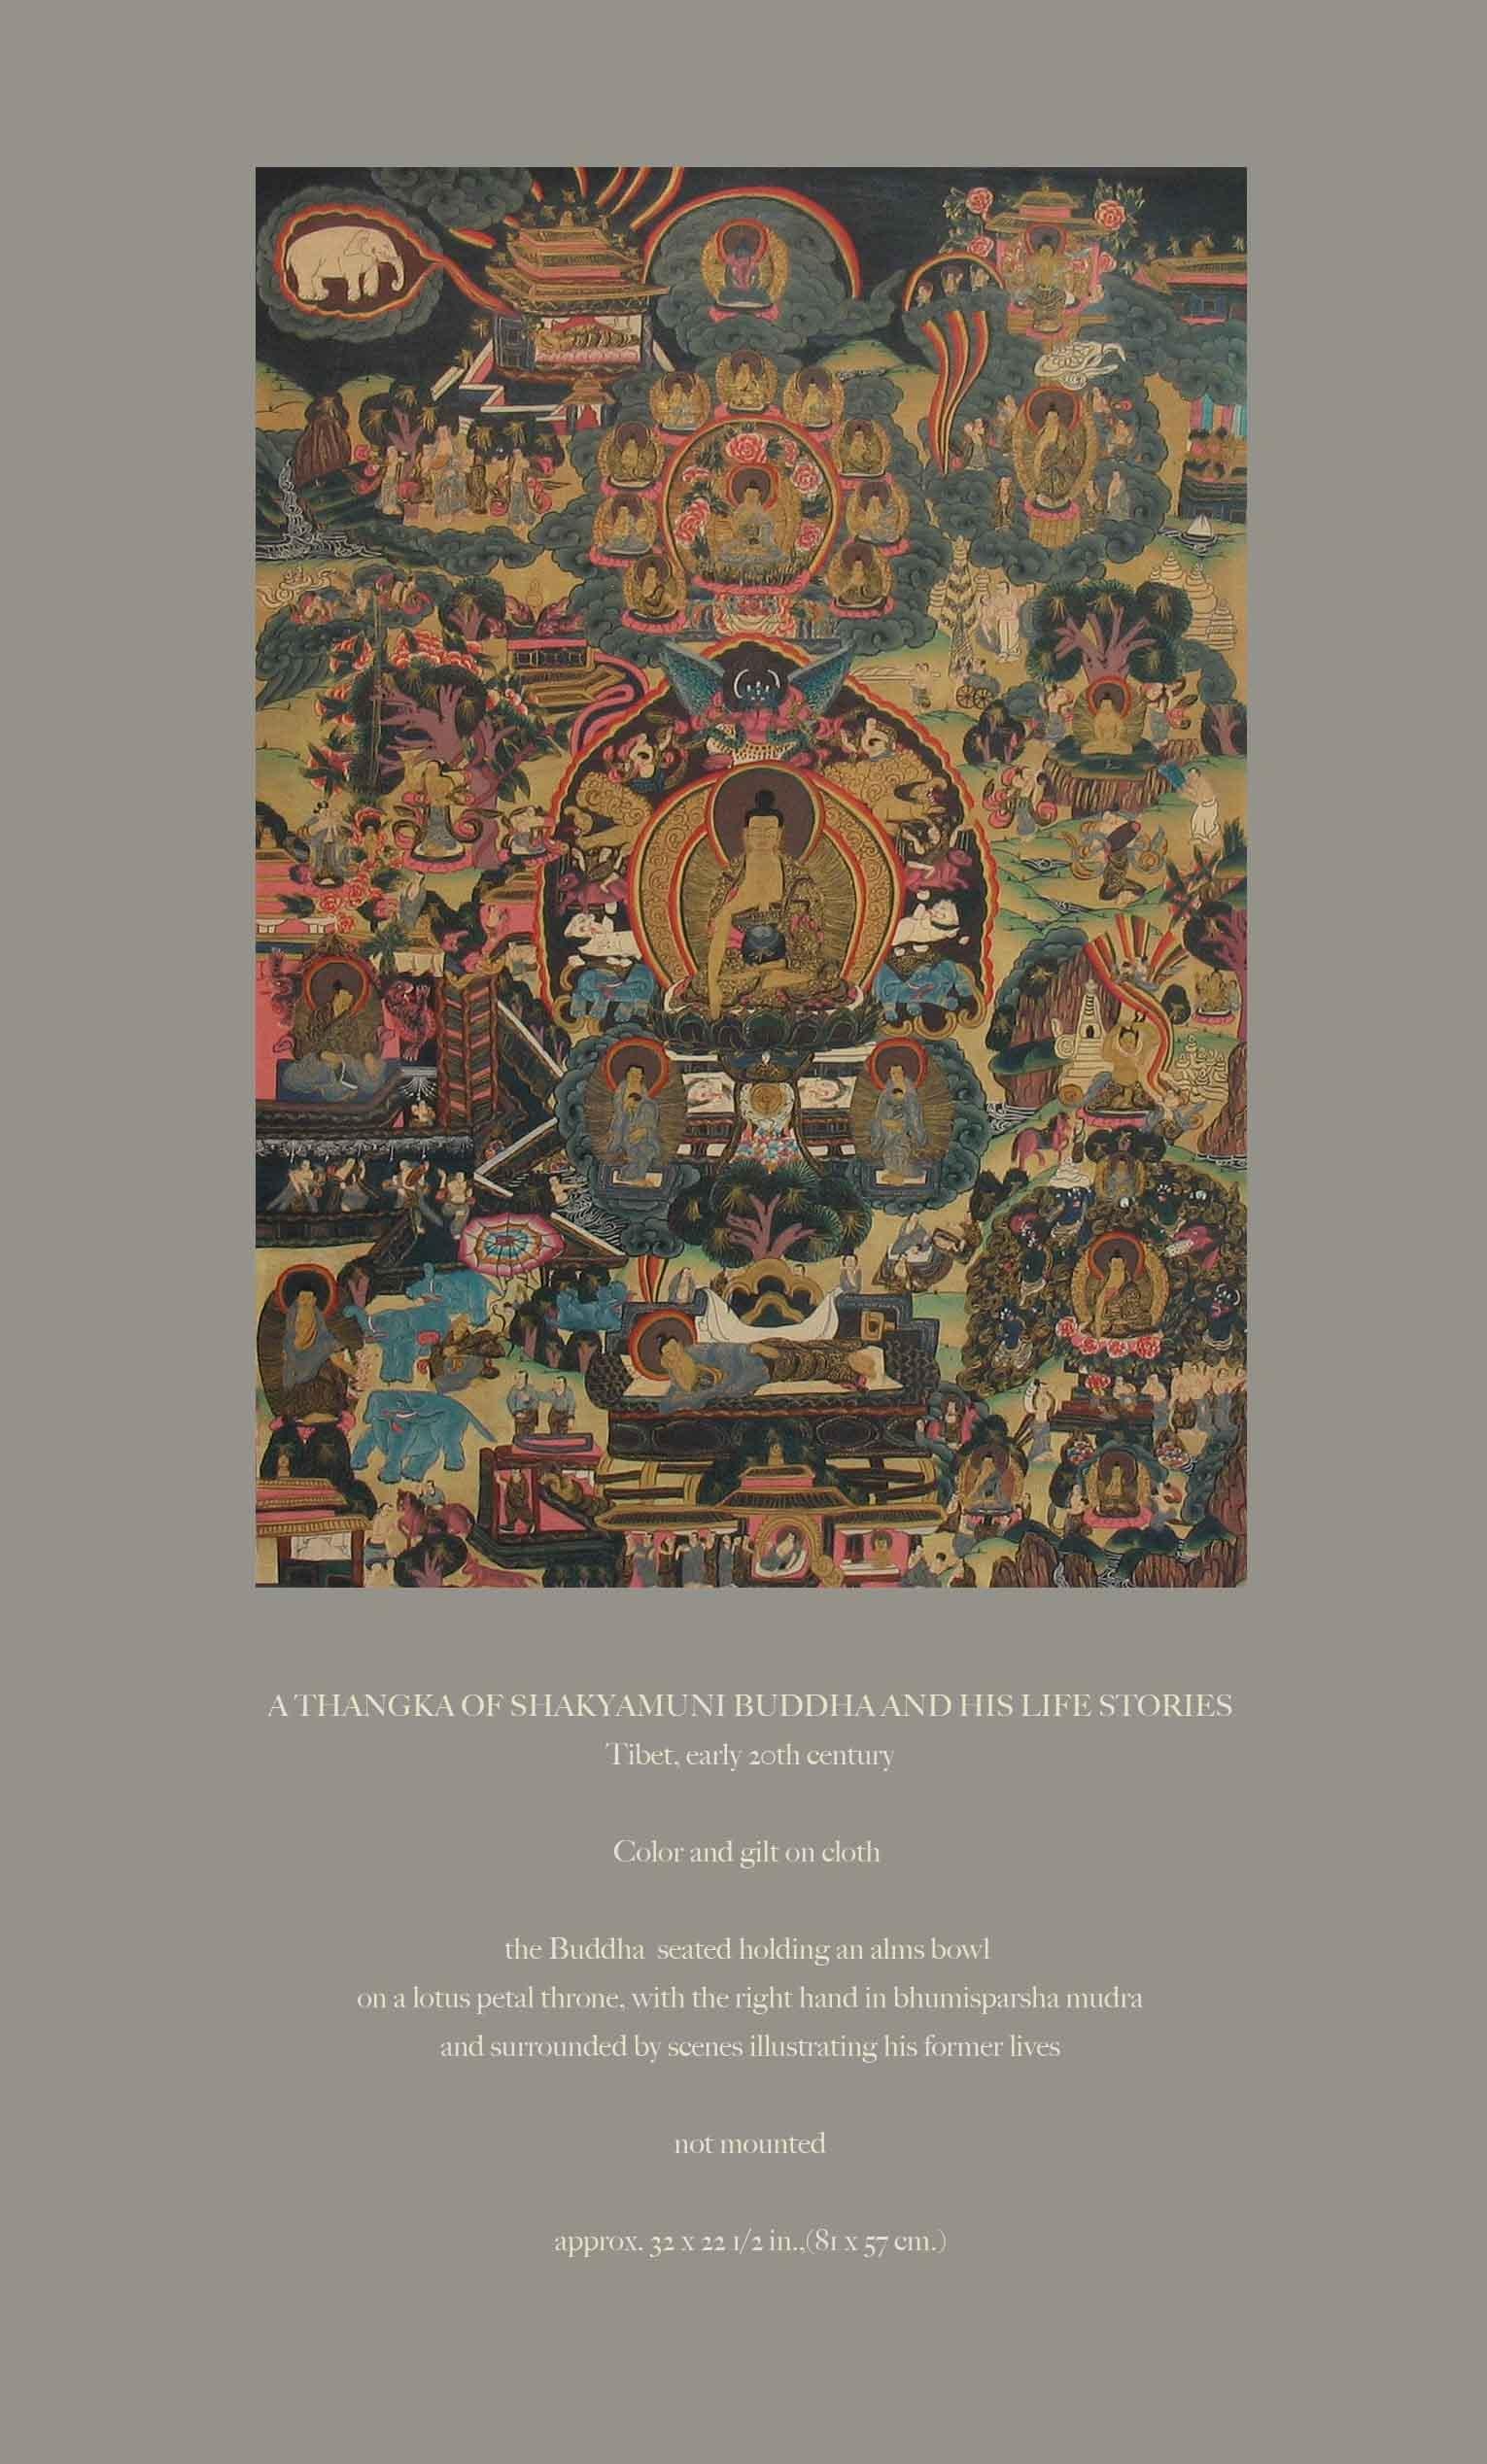 A Thangka of Shakyamuni Buddha and His Life Stories, Tibet, early 20th century. Color and gilt on cloth wit Buddha seated holding an Alms bowl on a lotus petal throne, with the right hand in bhumisparsha mudra and surrounded by scenes illustrating